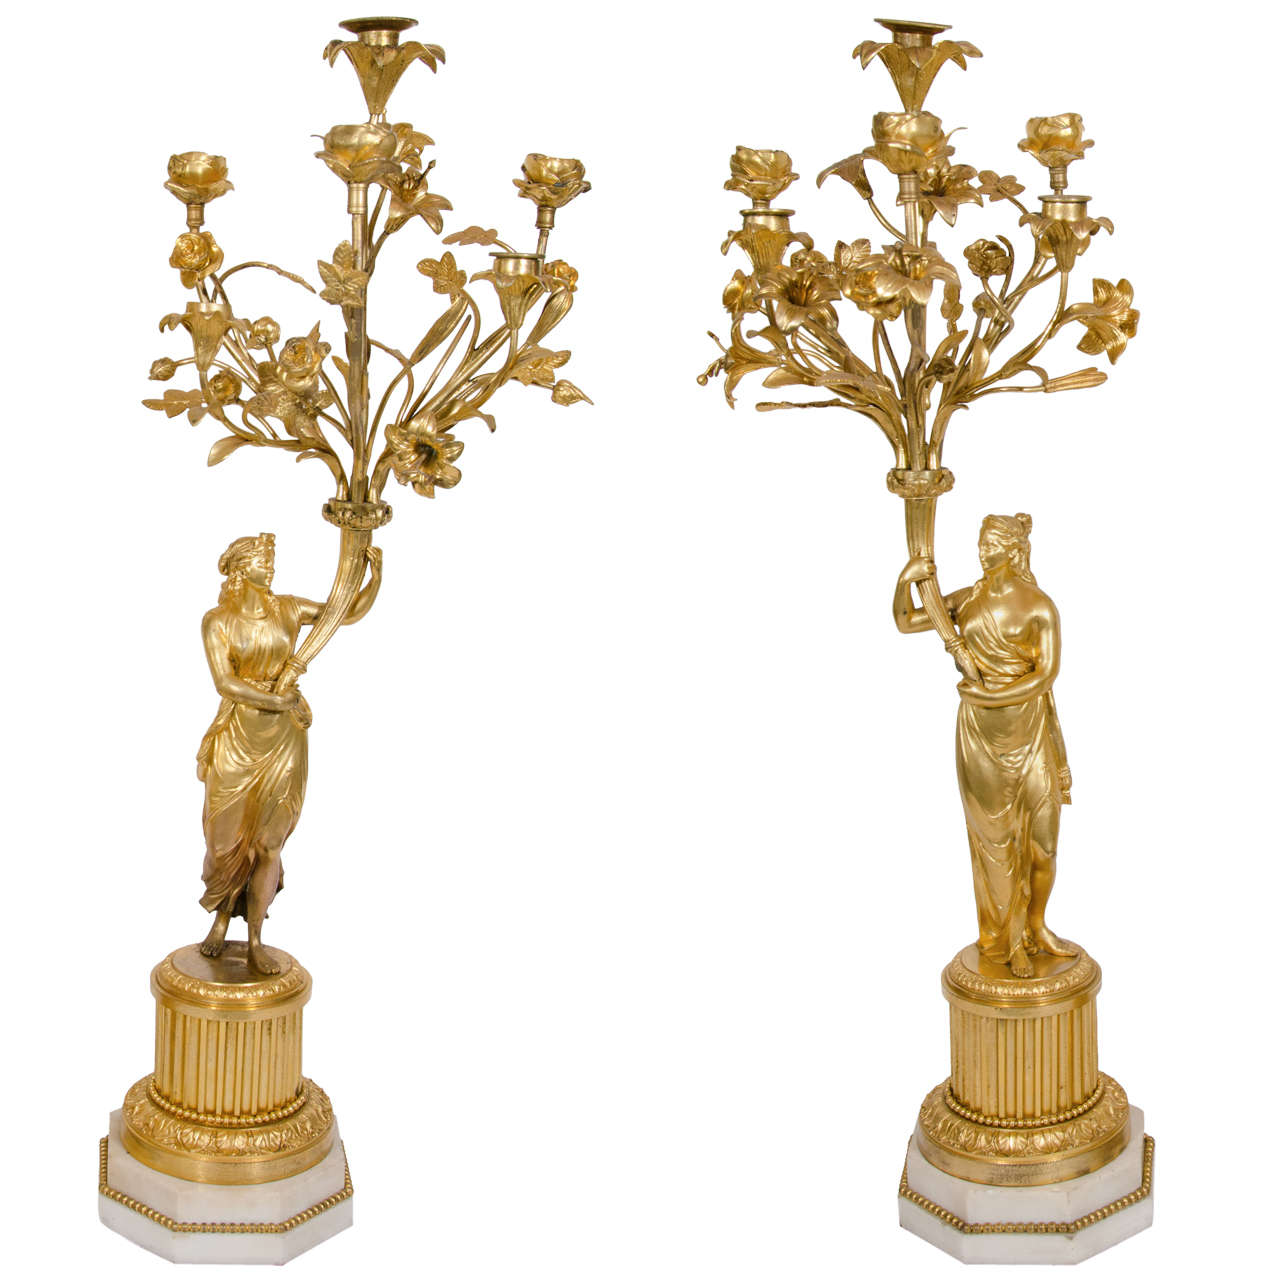 Pair of Large Antique French Louis XVI Style Gilt Bronze Figural Candelabras